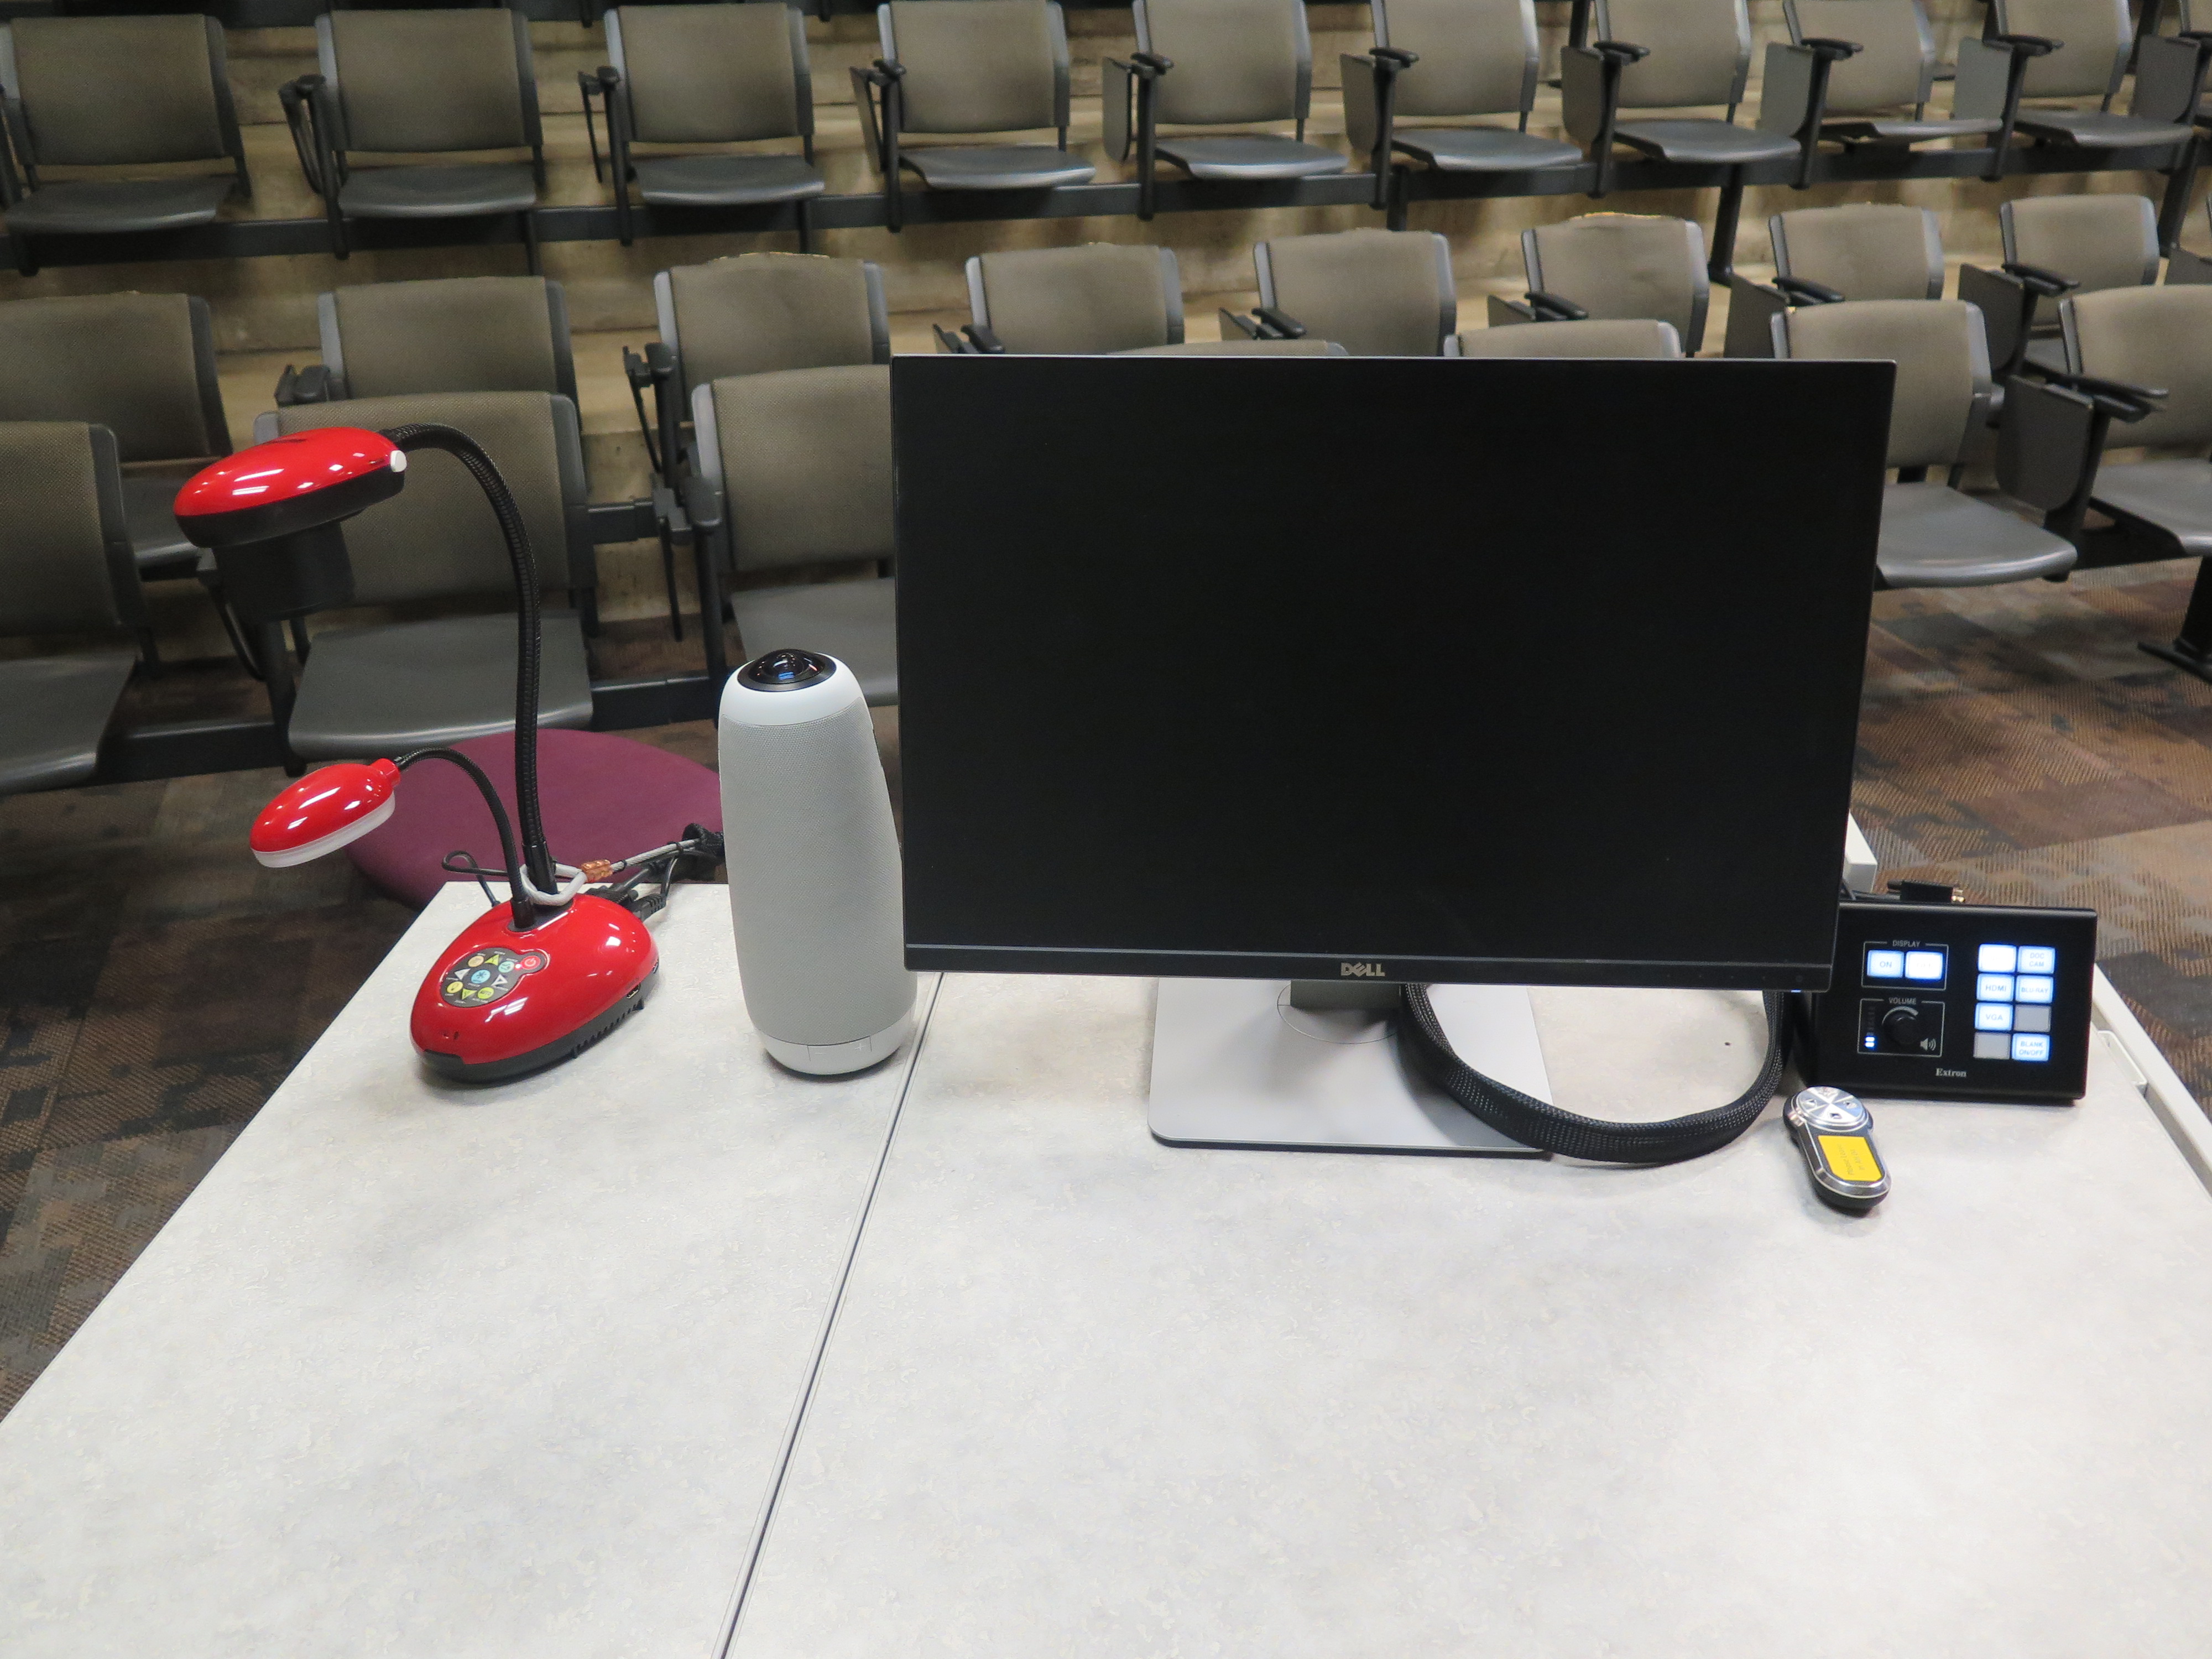 On top of Podium is Owl webcam, Dell Computer Monitor, AV Push Button Controller, and Lumens Ladybug Document Camera.